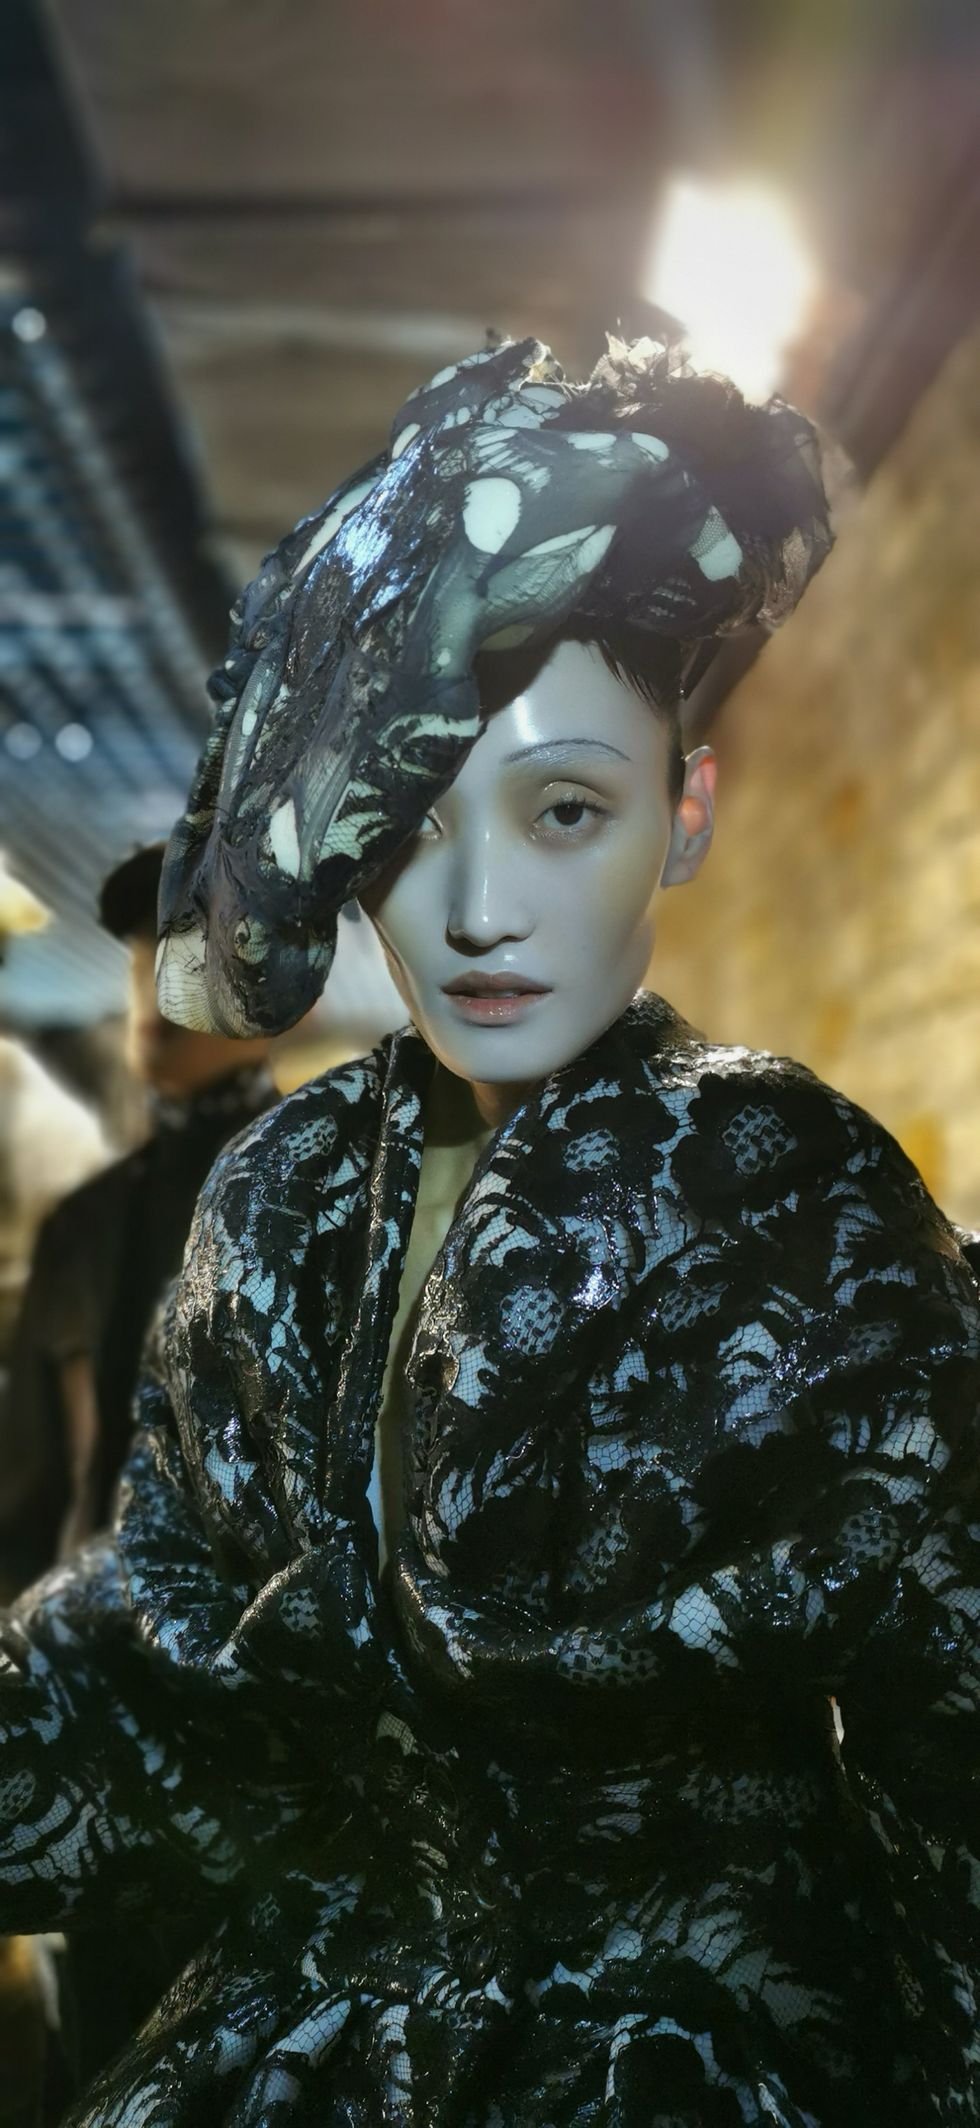 Recreate the Porcelain Doll Effect from the Maison Margiela Couture ...